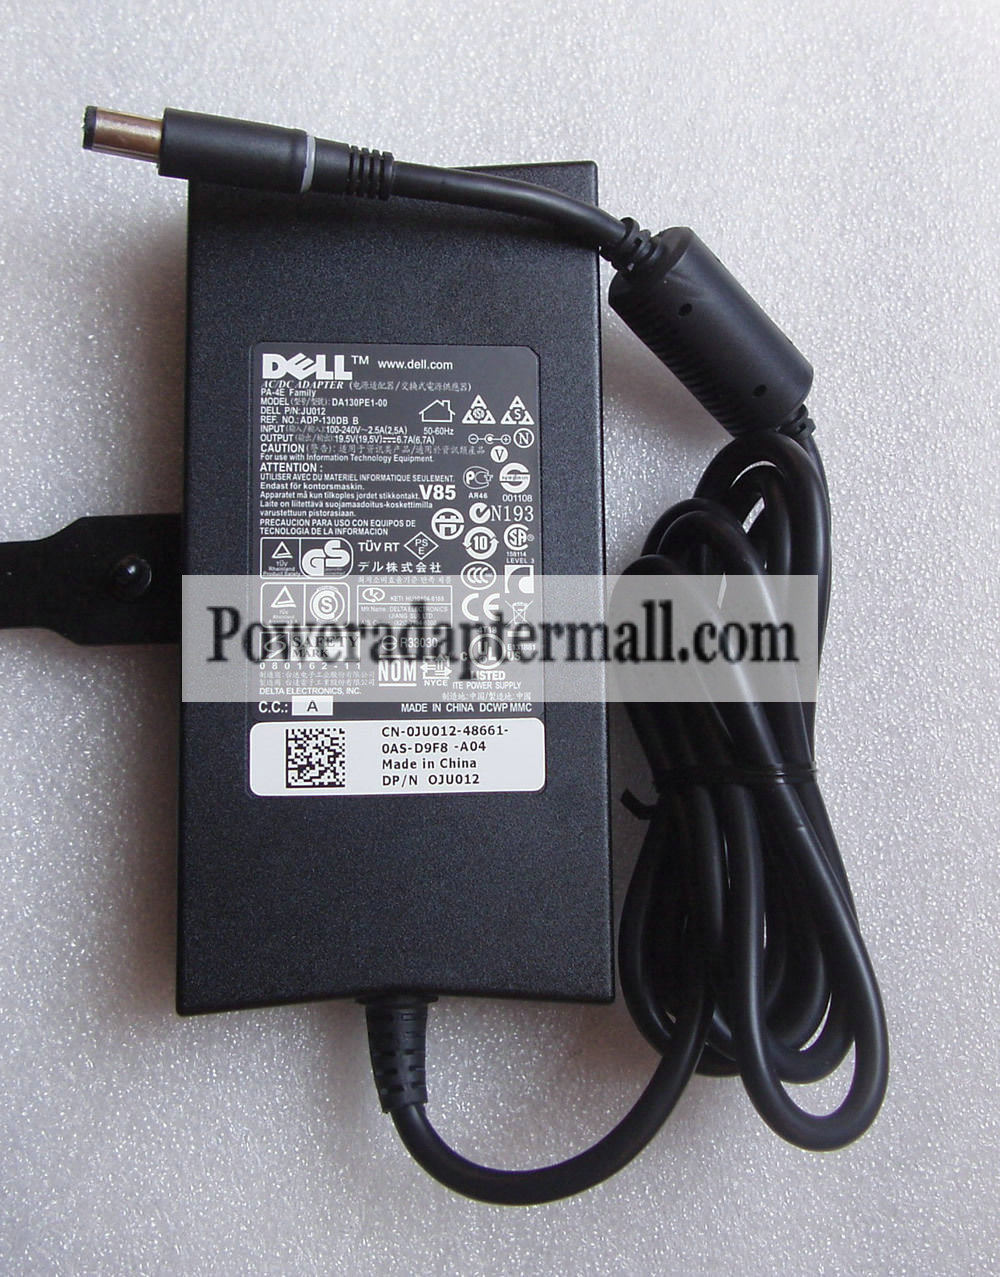 Dell Vostro 3700 3750 2510 19.5V 6.7A laptop AC Adapter